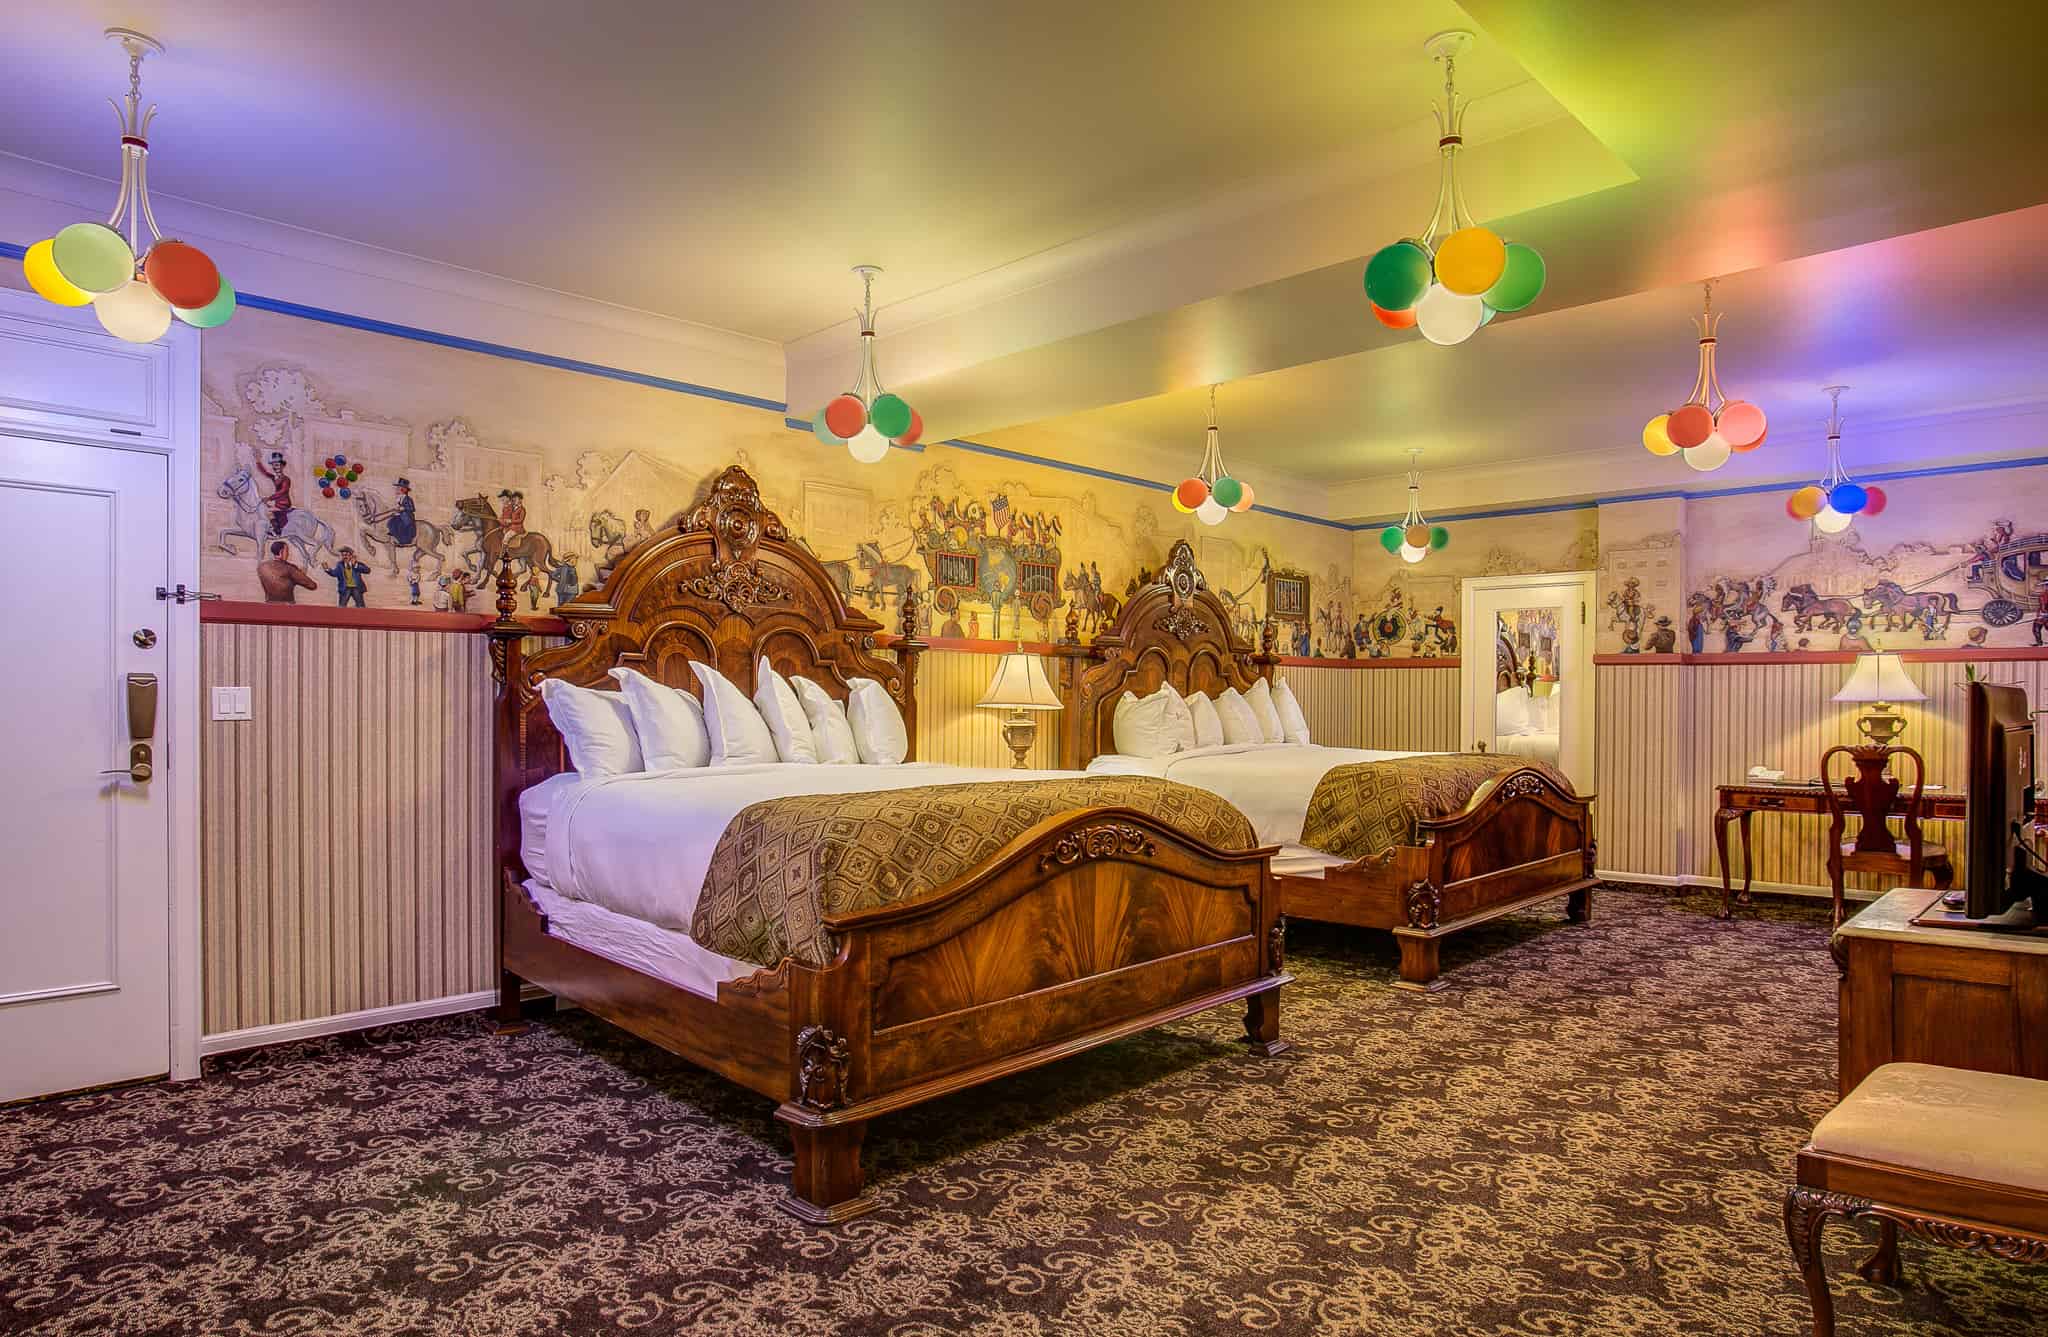 Whimsical Meets Historic: the Famous Circus Room>